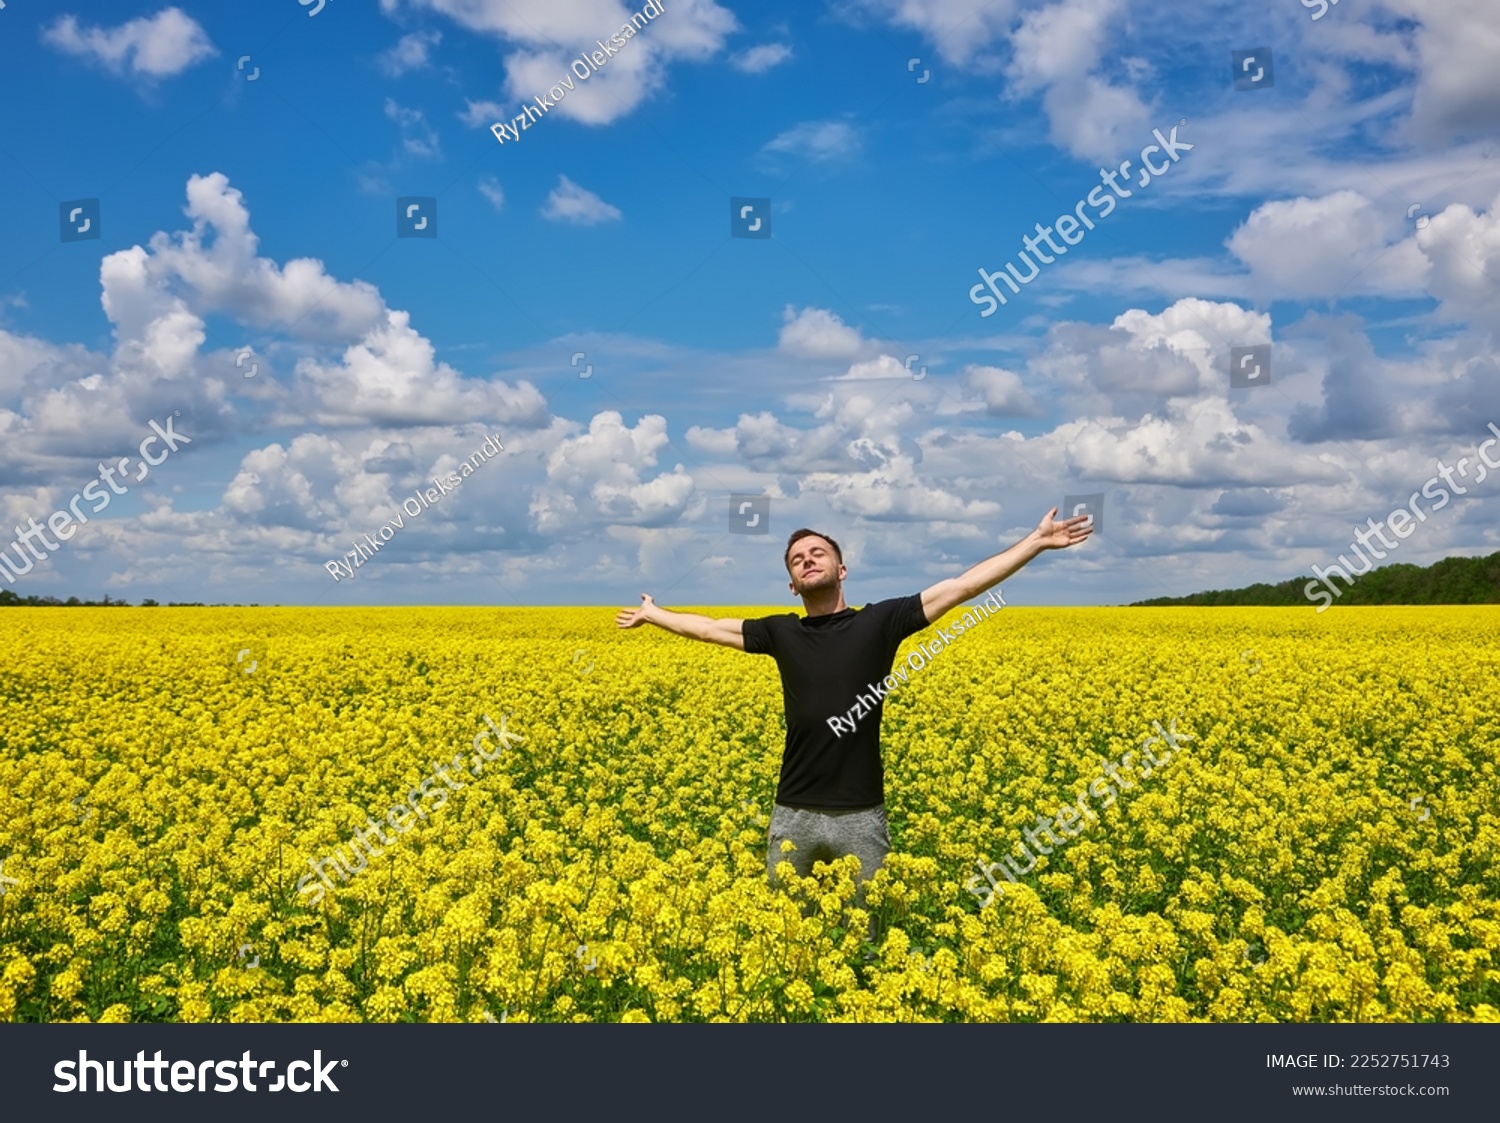 Attractive man with arms outstretched. Handsome young man standing in a field of blooming yellow rapeseed flowers. #2252751743